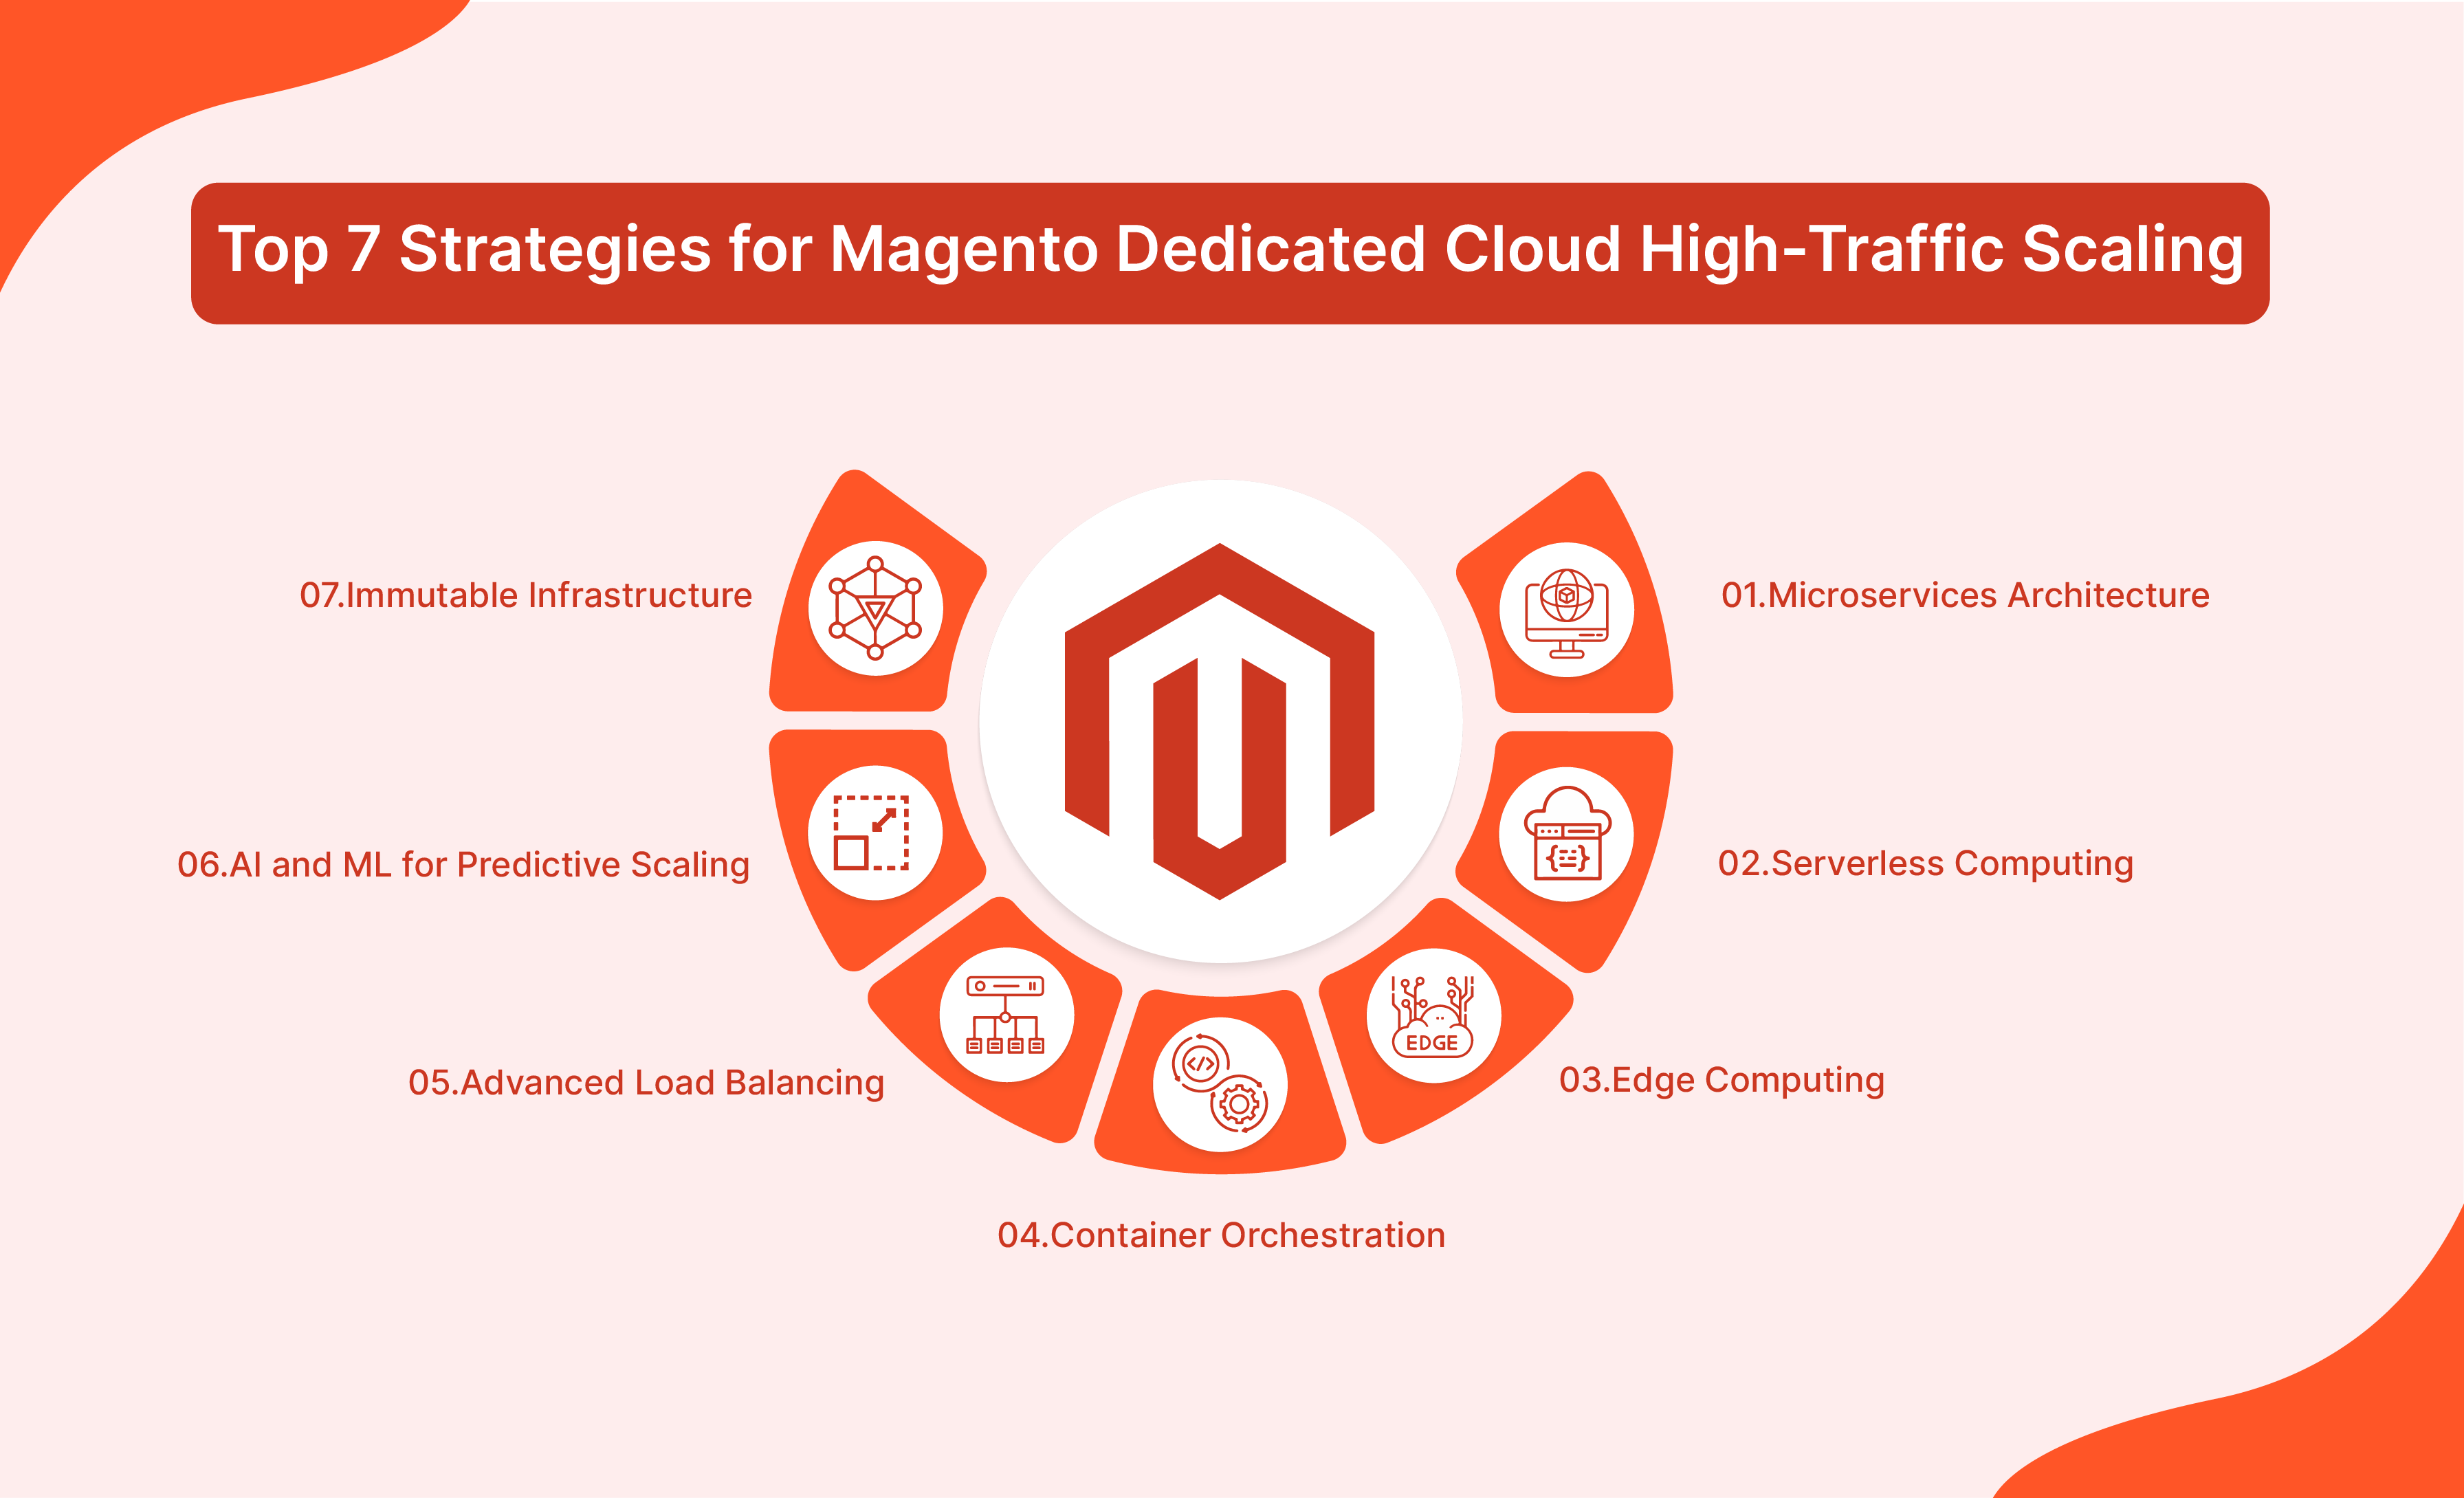 Top 7 Strategies for Magento Dedicated Cloud High-Traffic Scaling